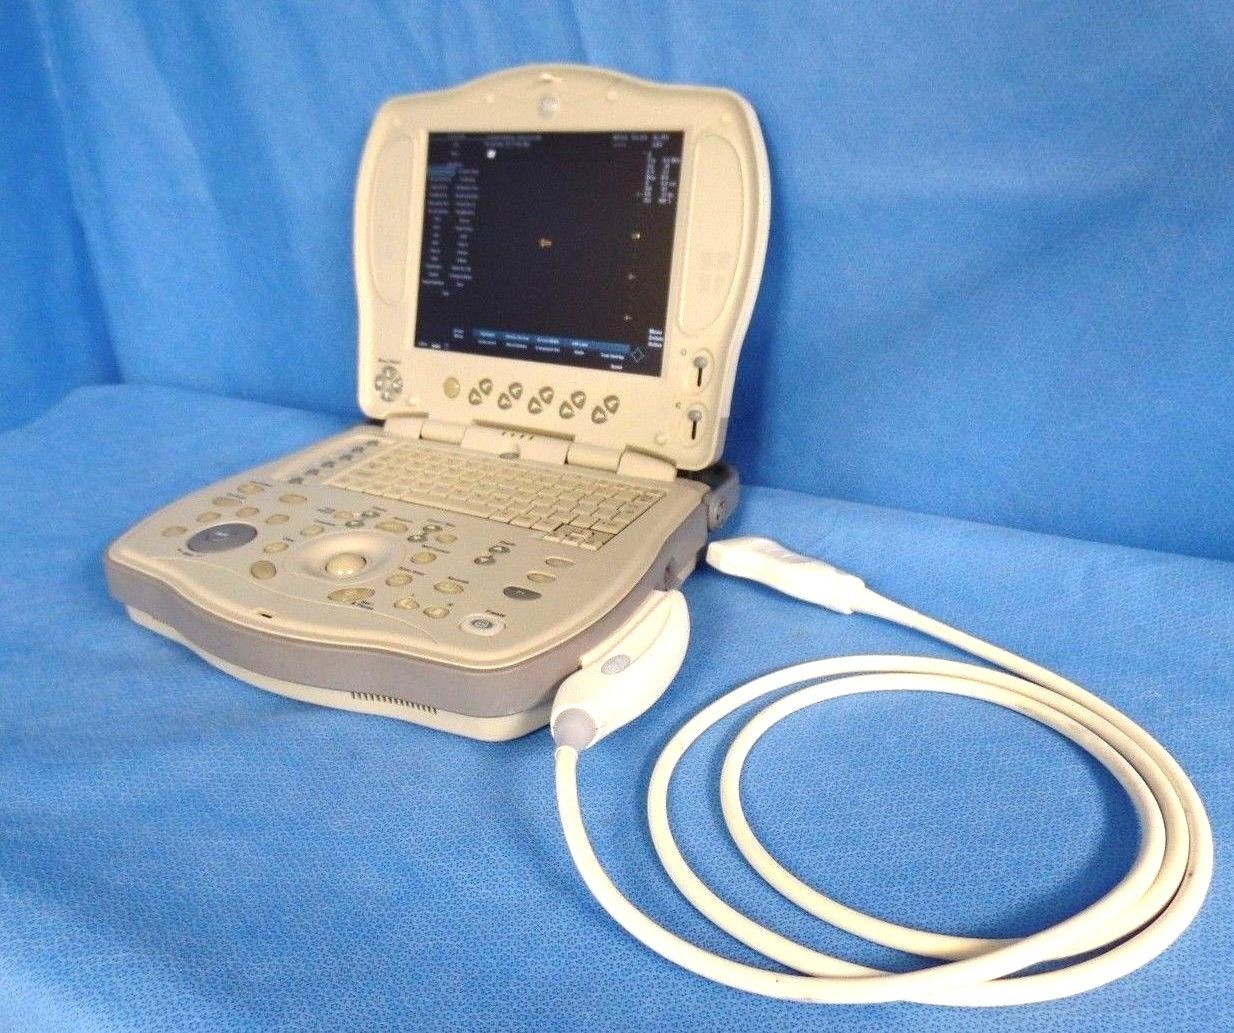 GE Logiq Book XP Ultrasound SV 2.0 with 8L-RS Probe DOM 2005